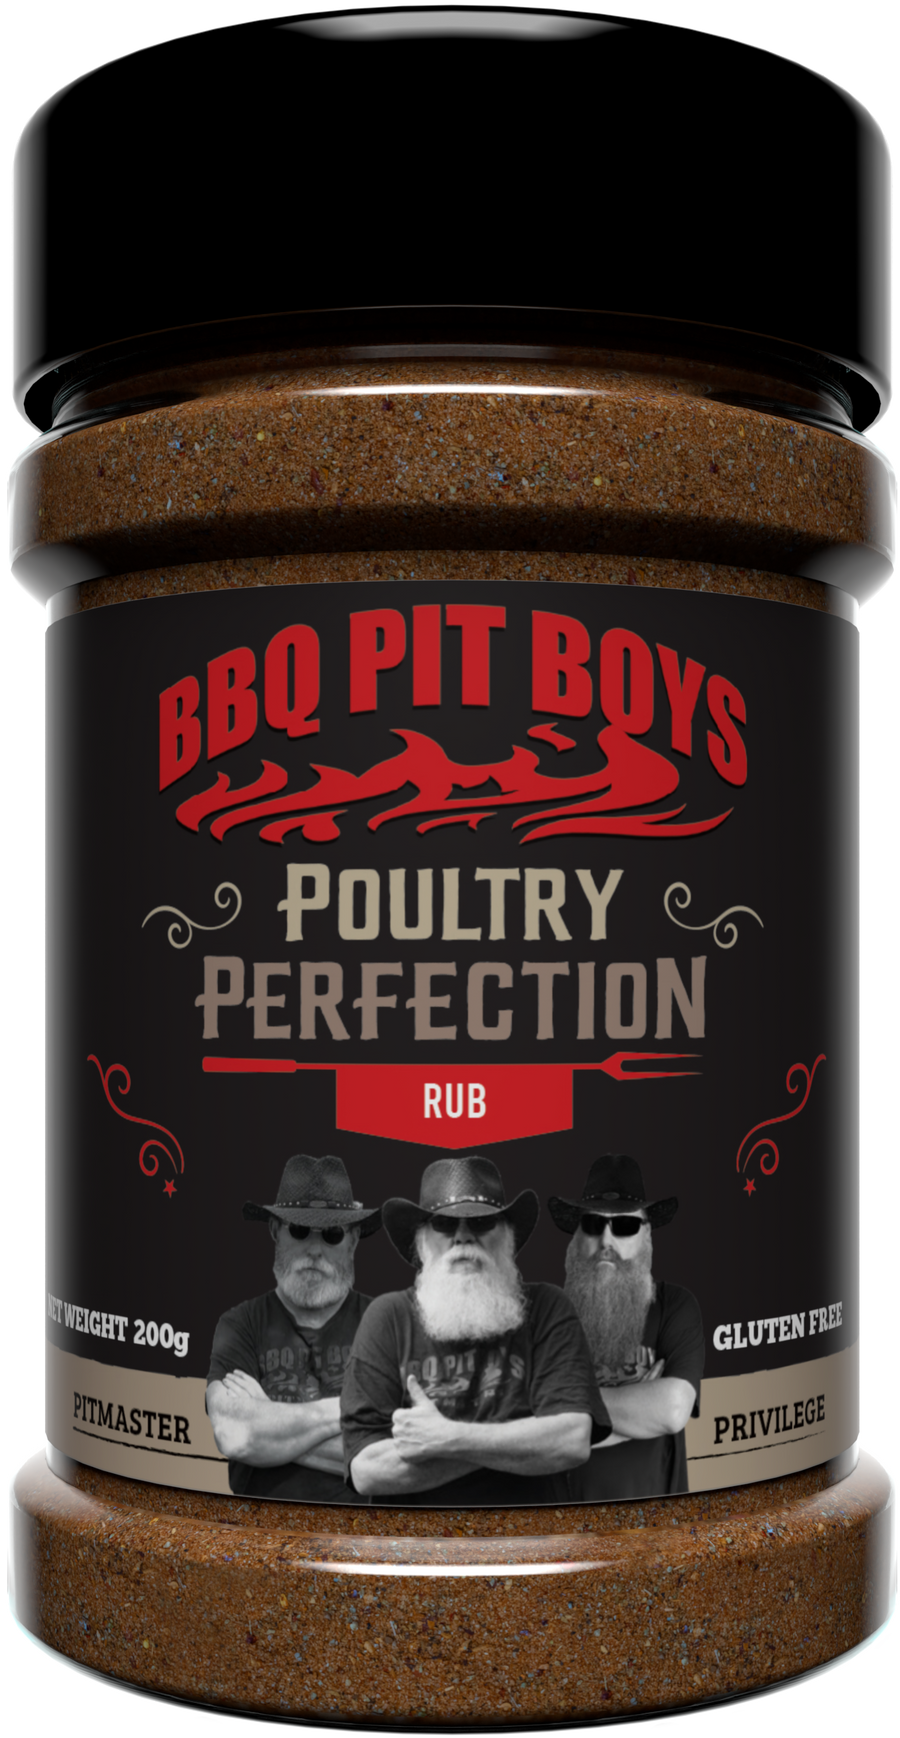 BBQ PIT BOYS - Poultry Perfection